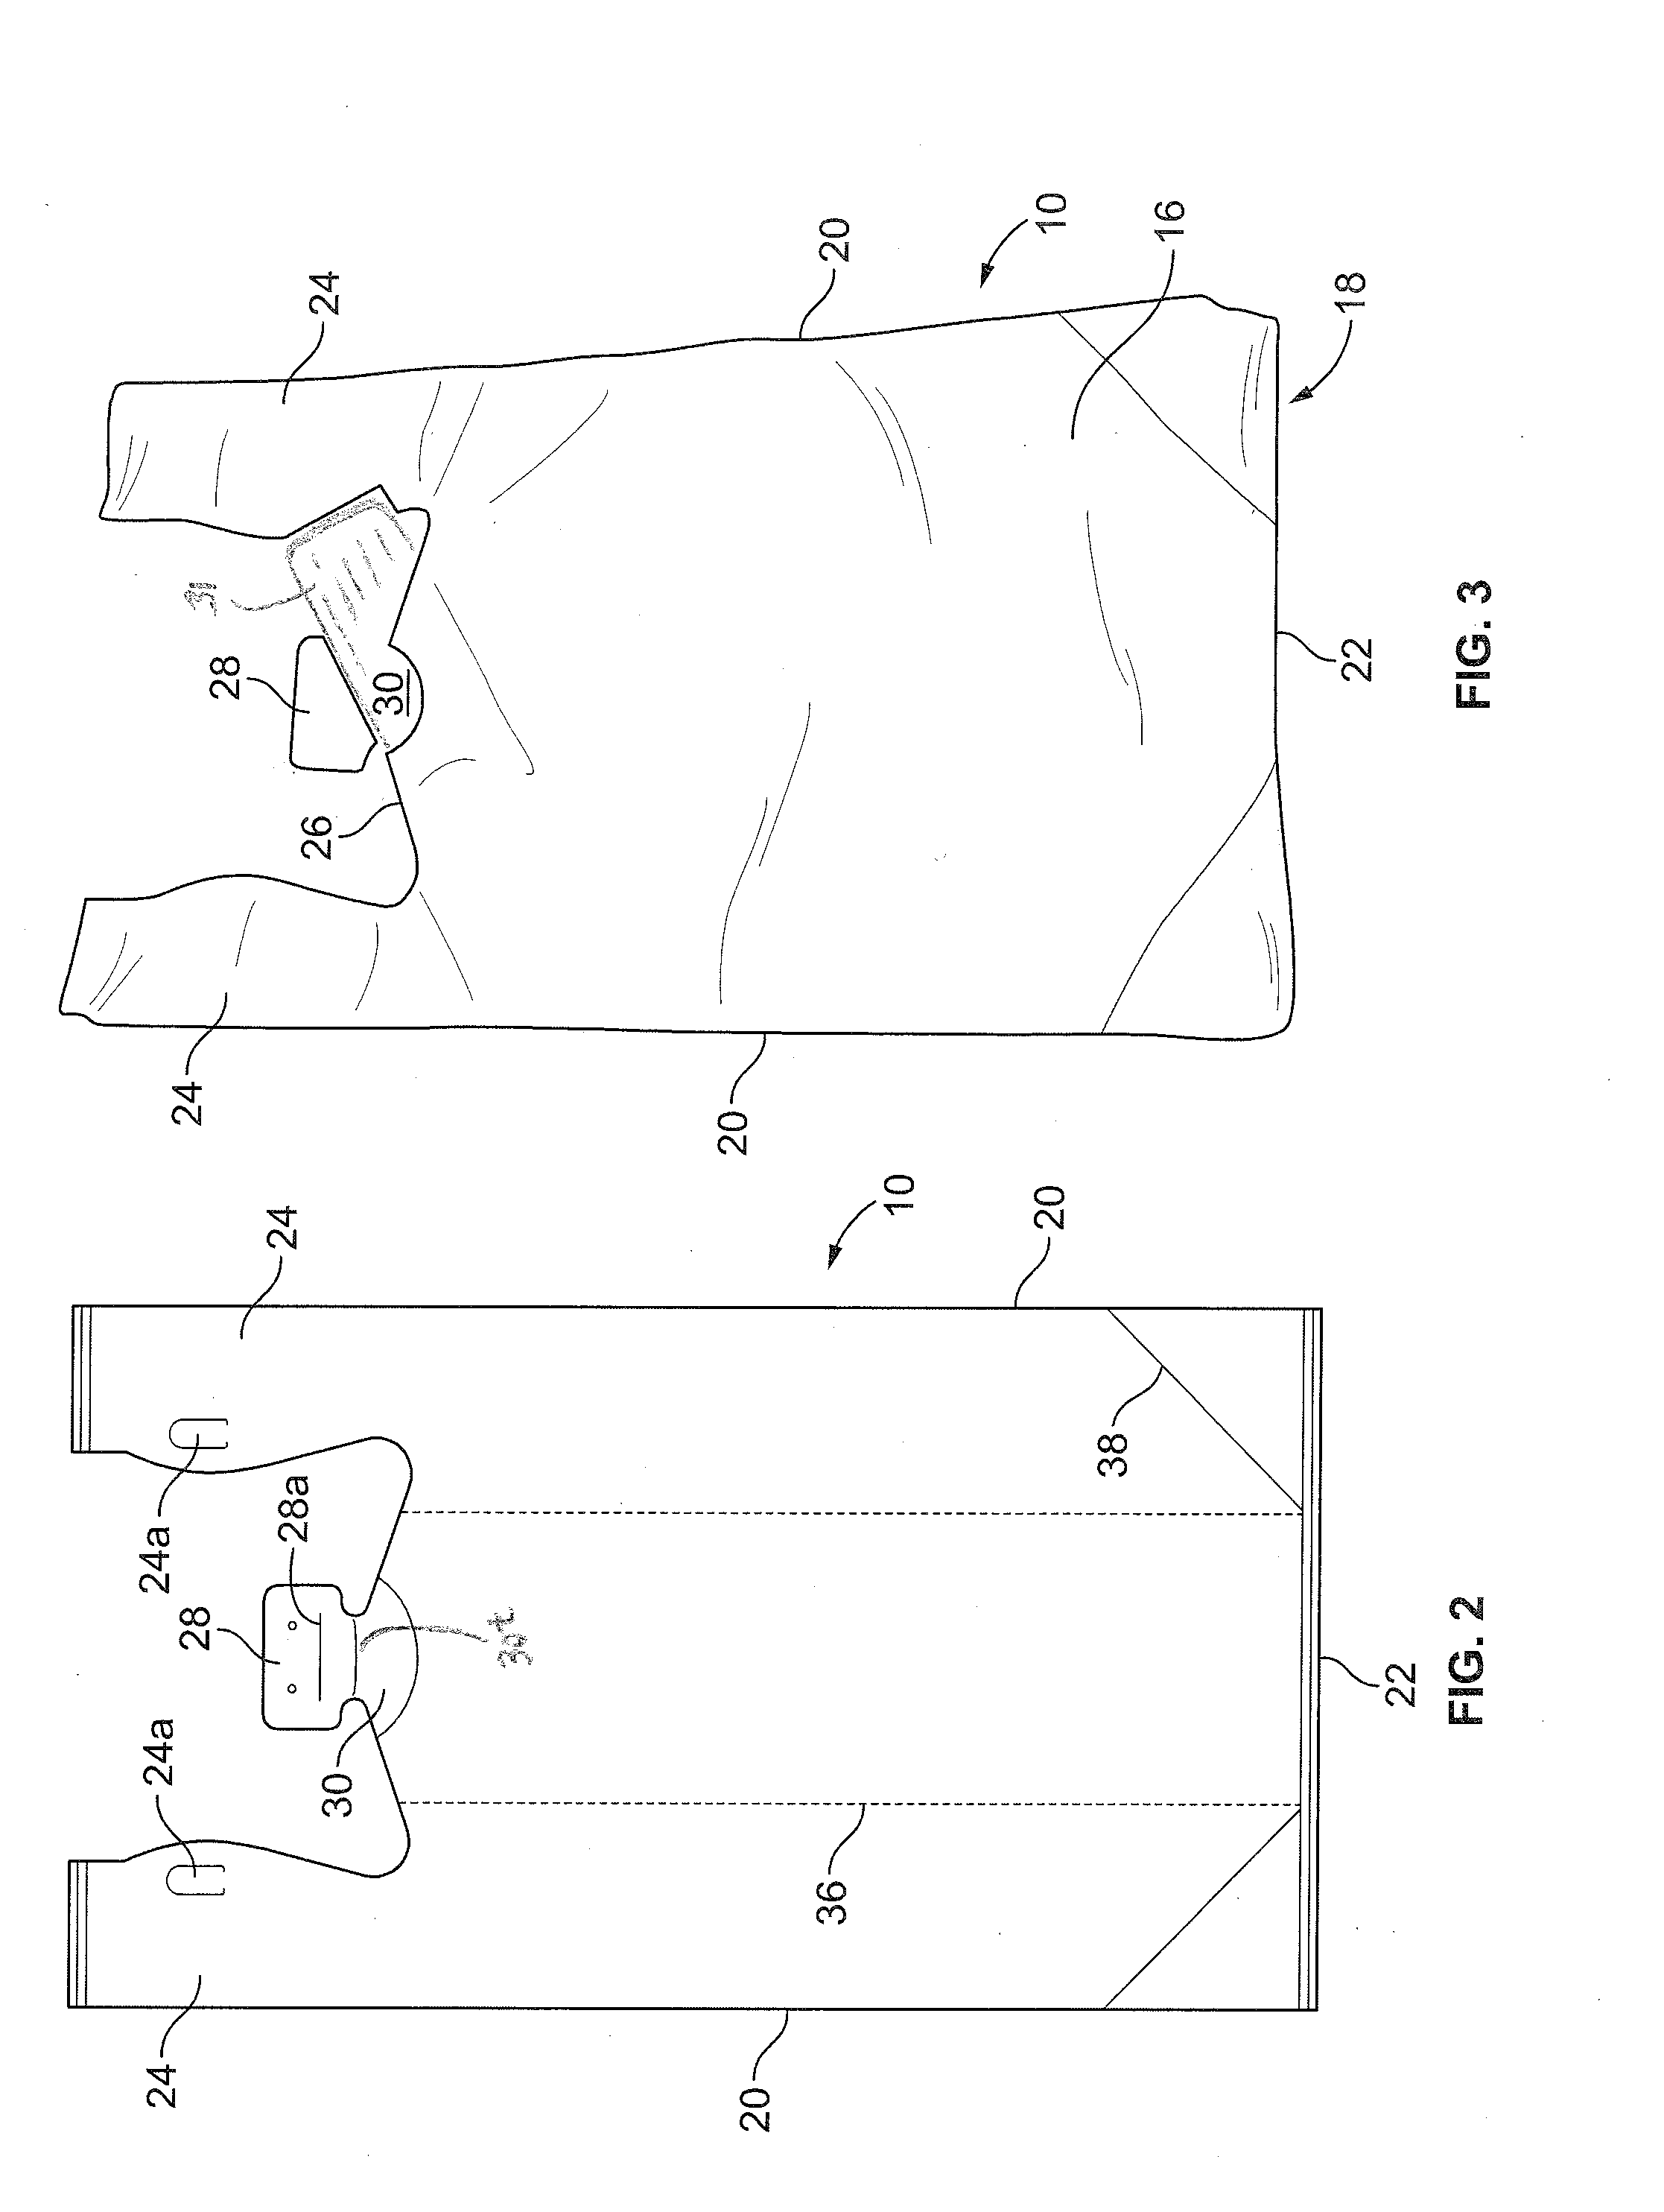 Plastic bag with easy open means, system for opening bags and method of manufacture